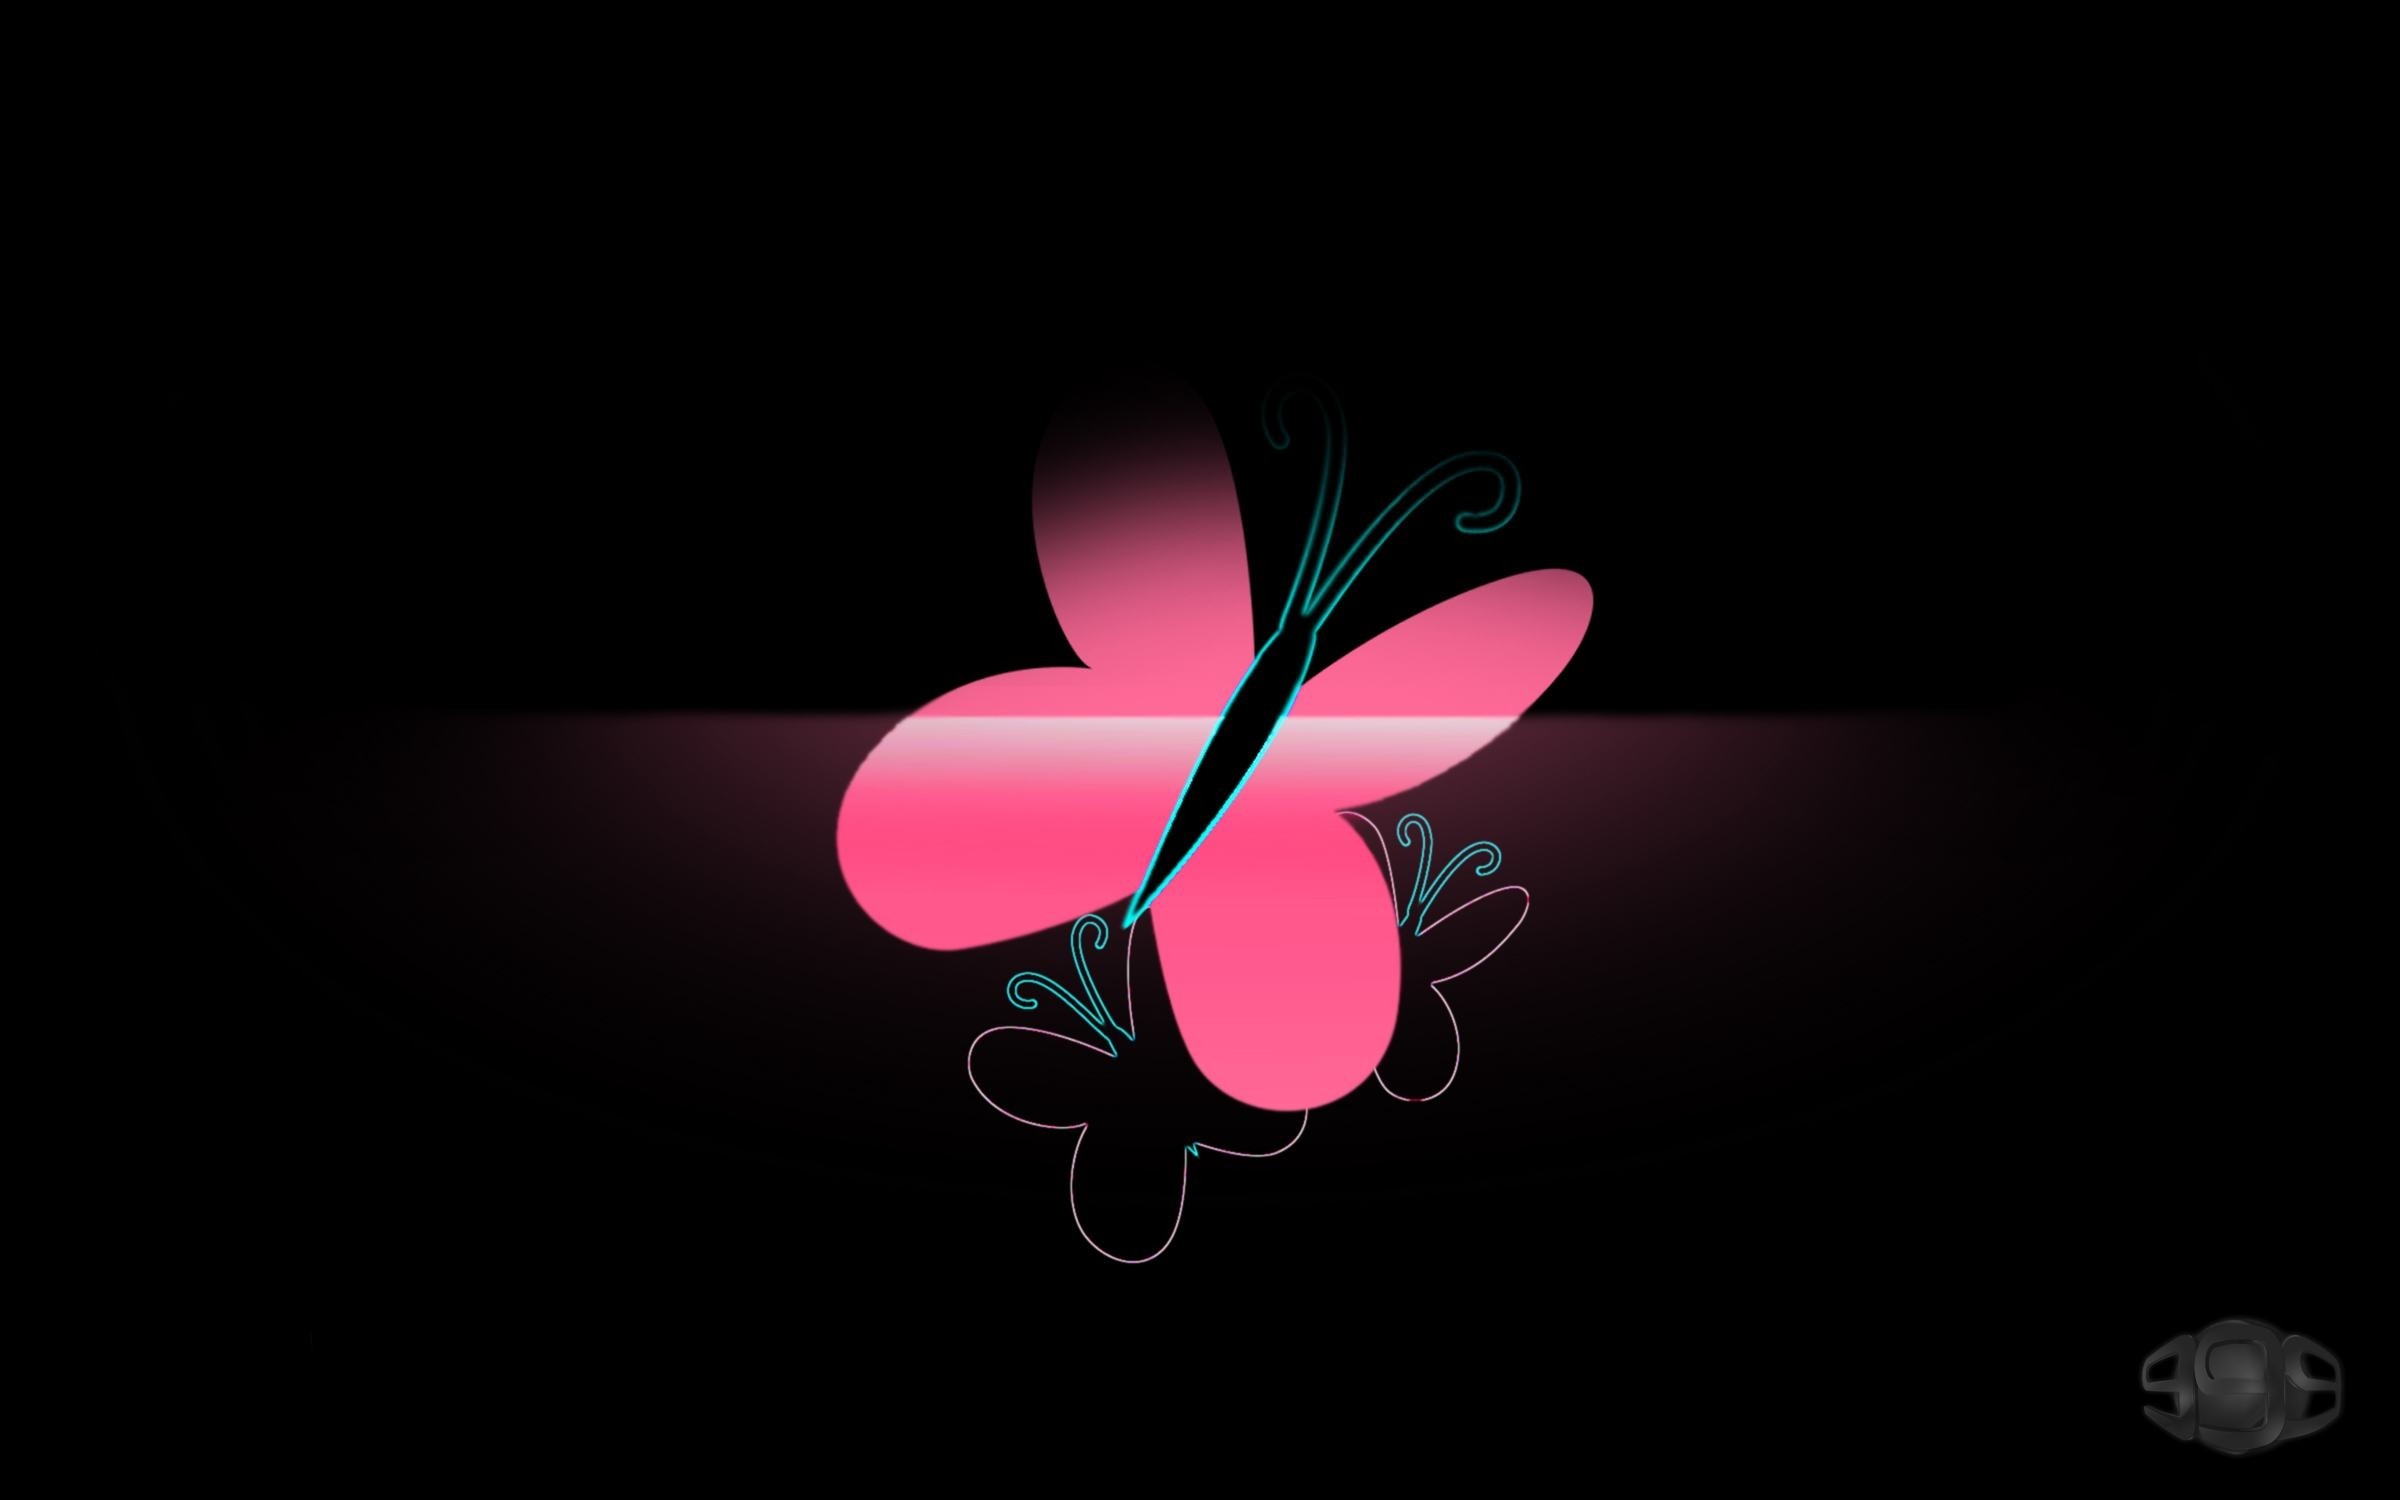 2400x1500 Wallpapers Backgrounds - Butterfly Black Background Fluttershy Wallpaper  Pink